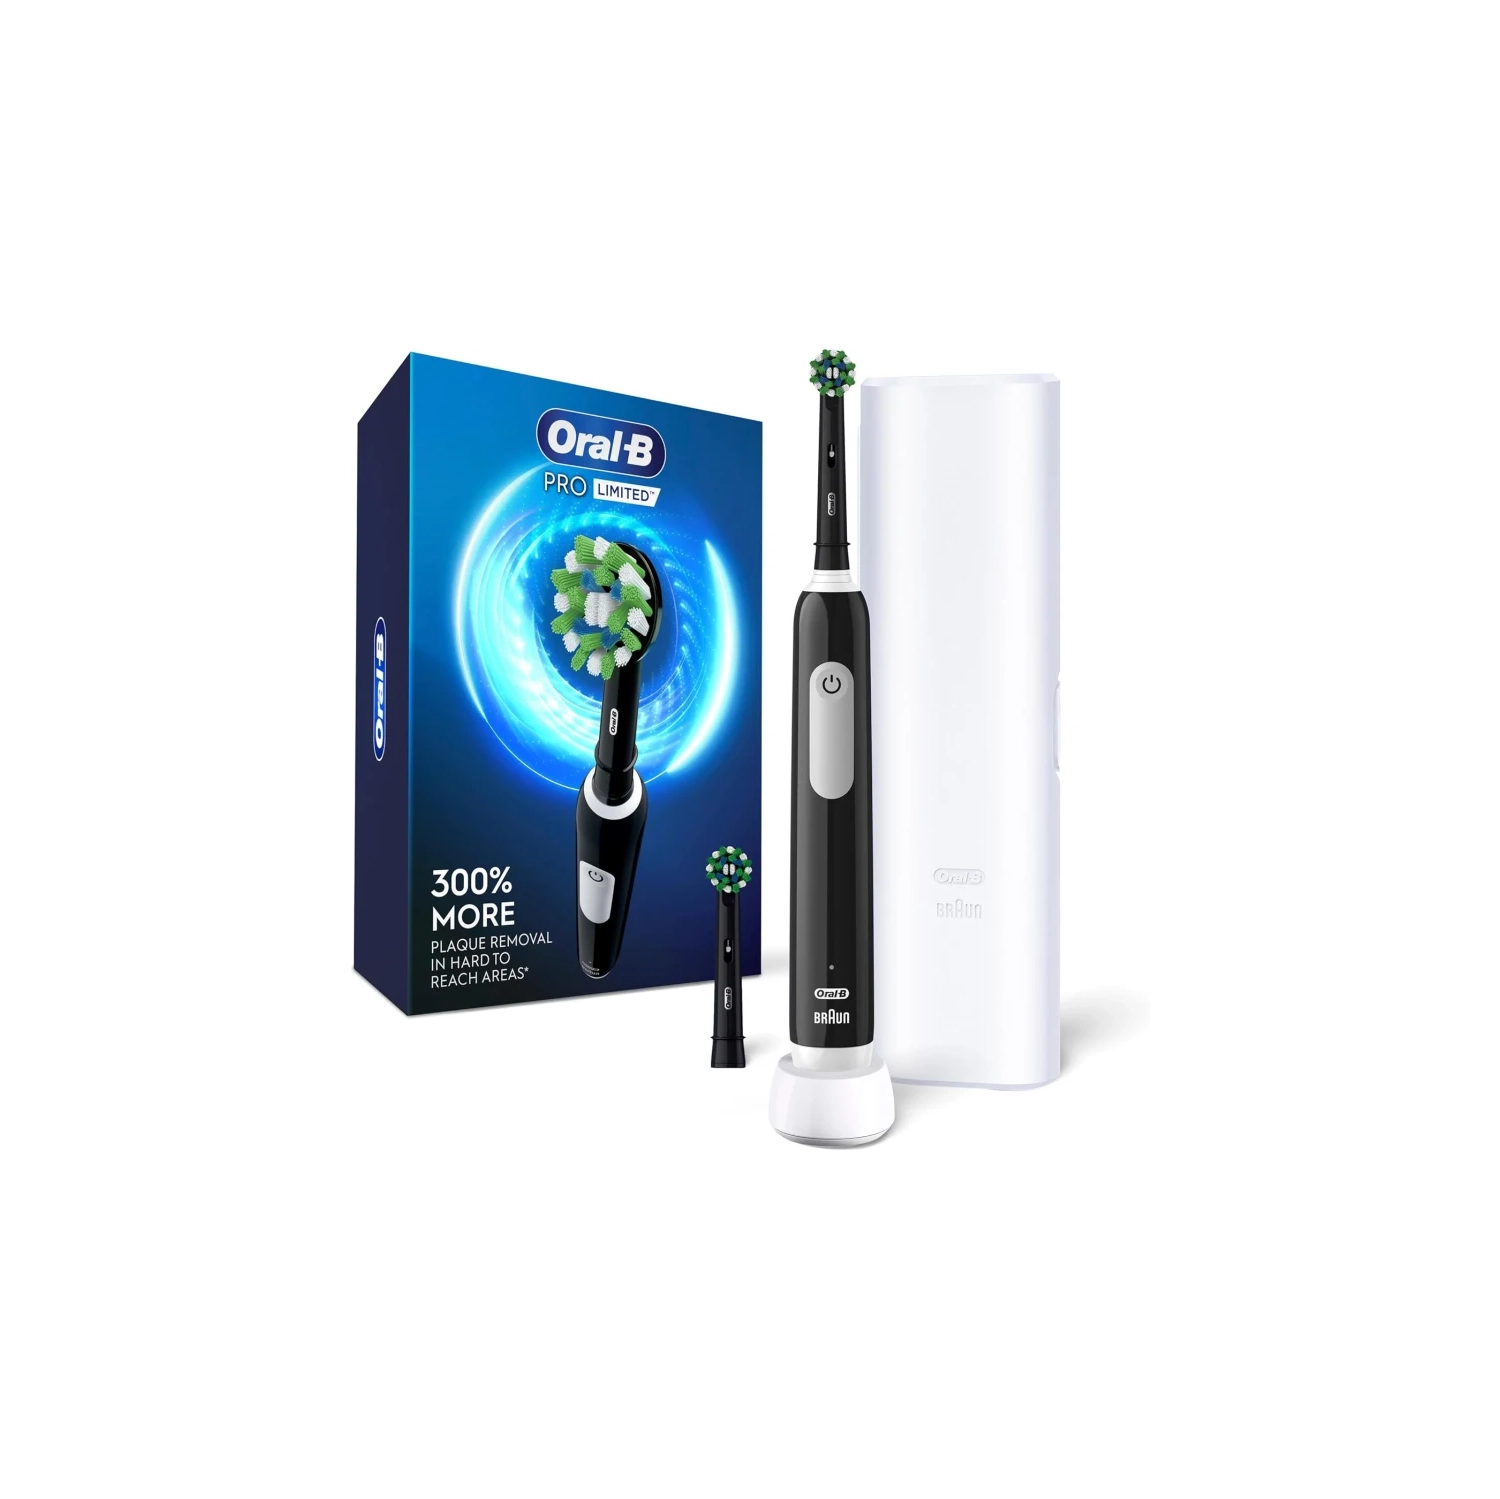 Oral-B Pro Limited Electric Toothbrush - Black | Rechargeable Power Toothbrush with 2 Brush Heads and Travel Case